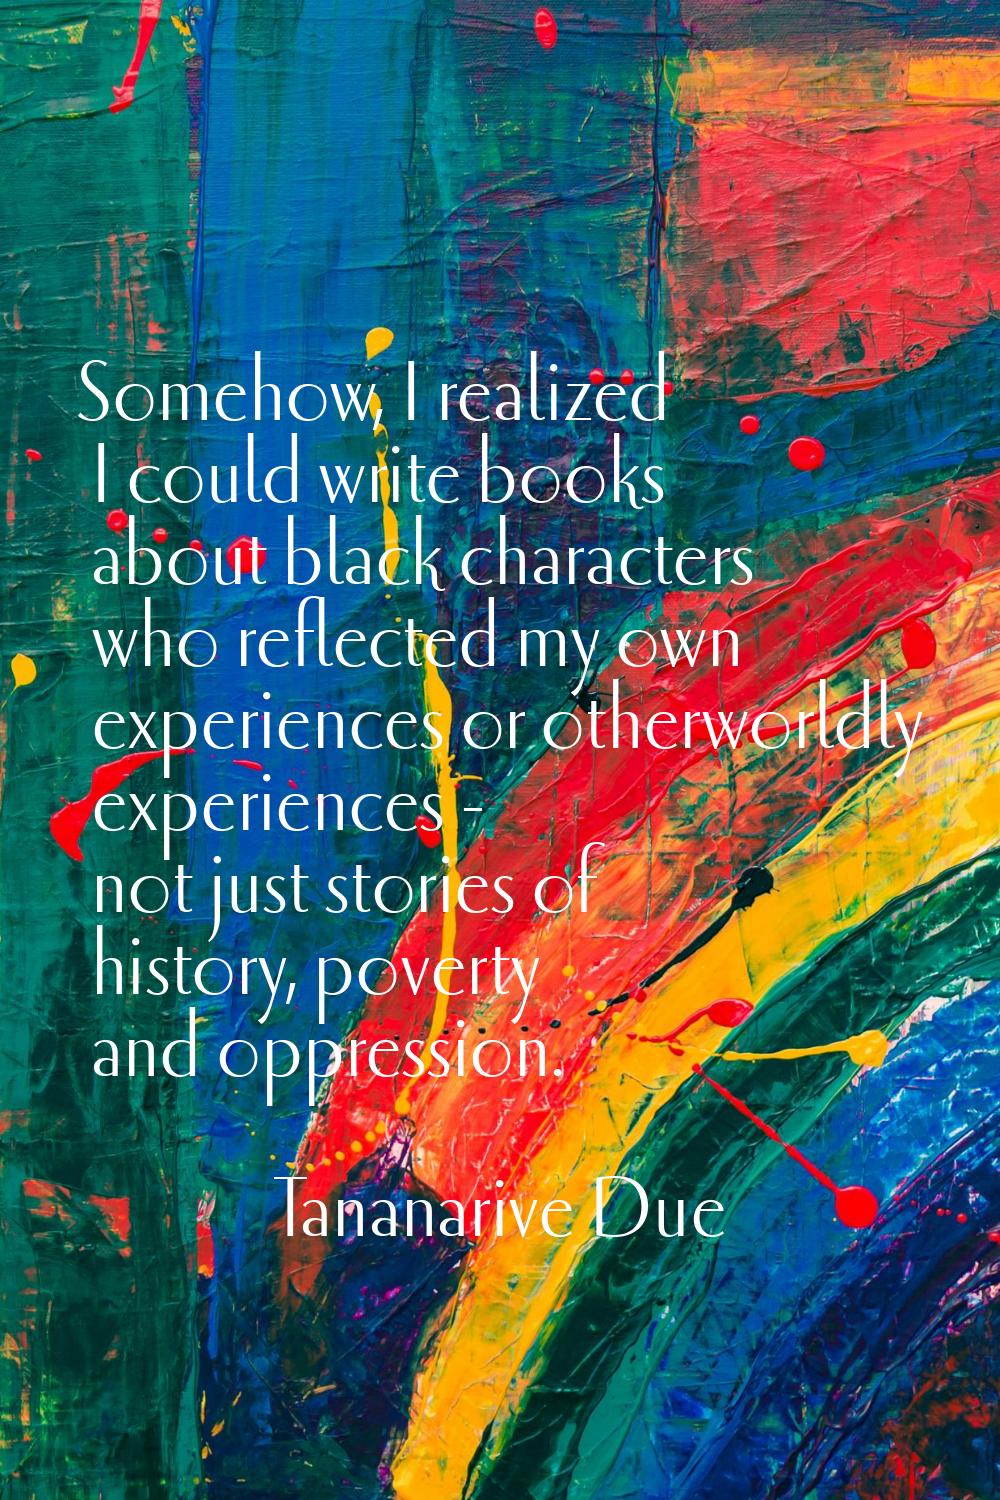 Somehow, I realized I could write books about black characters who reflected my own experiences or 